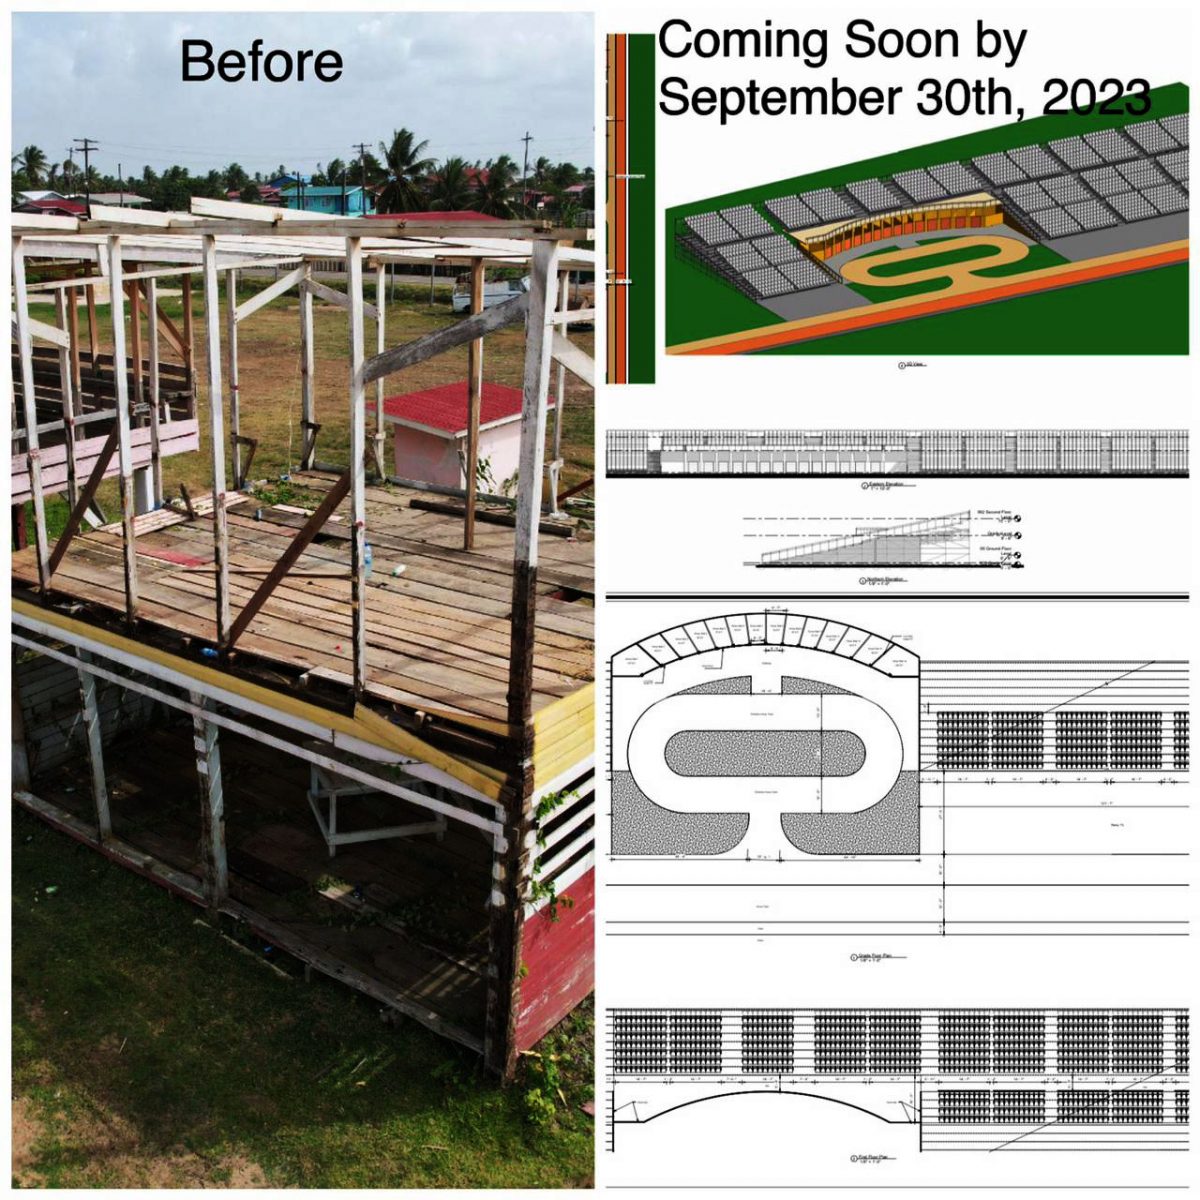 The proposed grandstand 